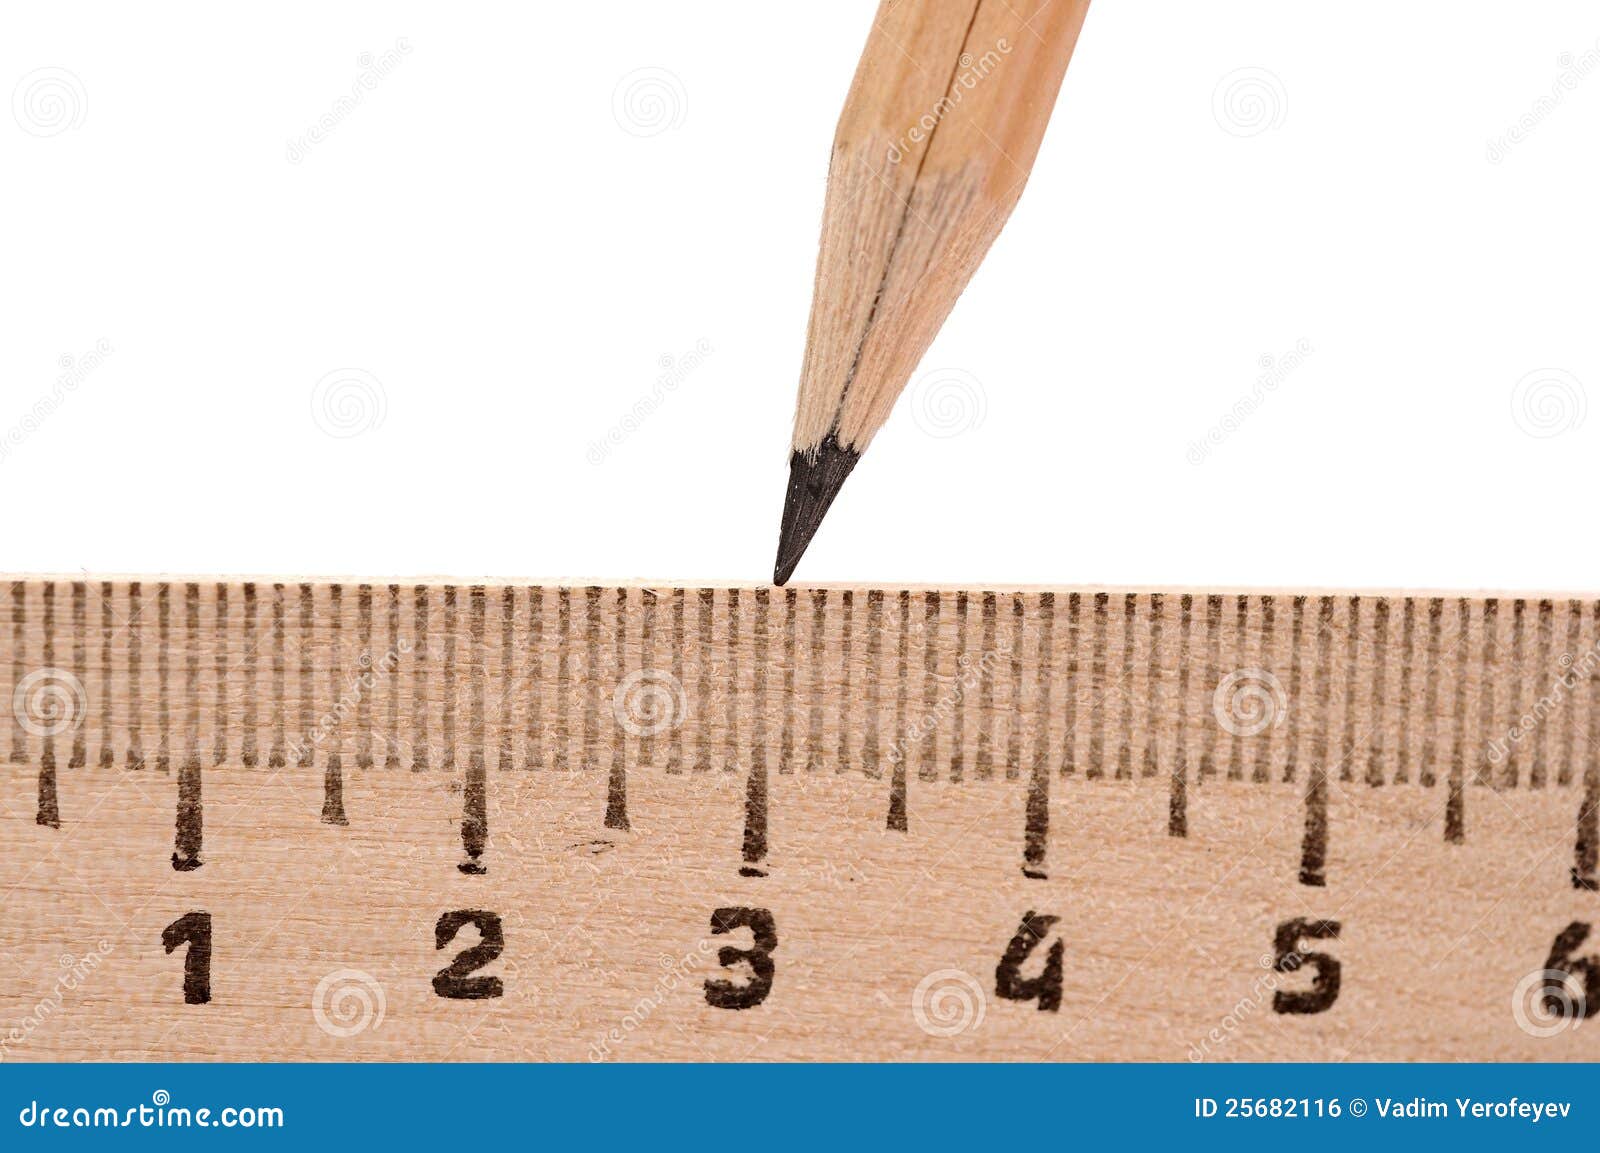 Royalty Free Stock Image: Ruler and wood pencil